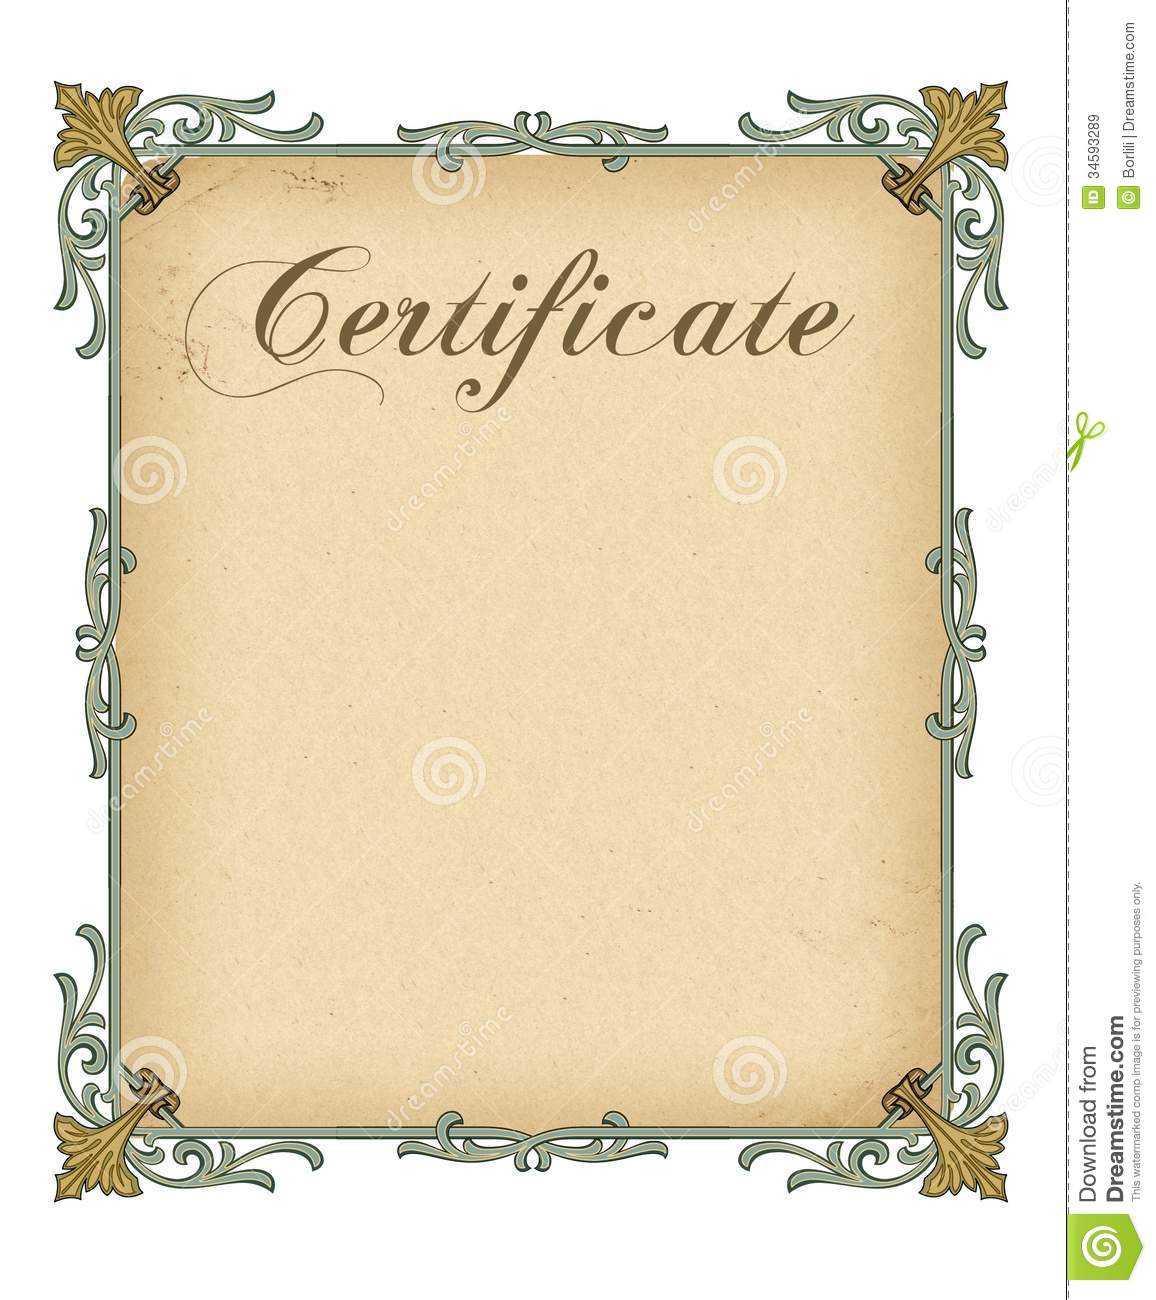 Blank Certificate Template Stock Illustration. Illustration Inside Blank Certificate Templates Free Download